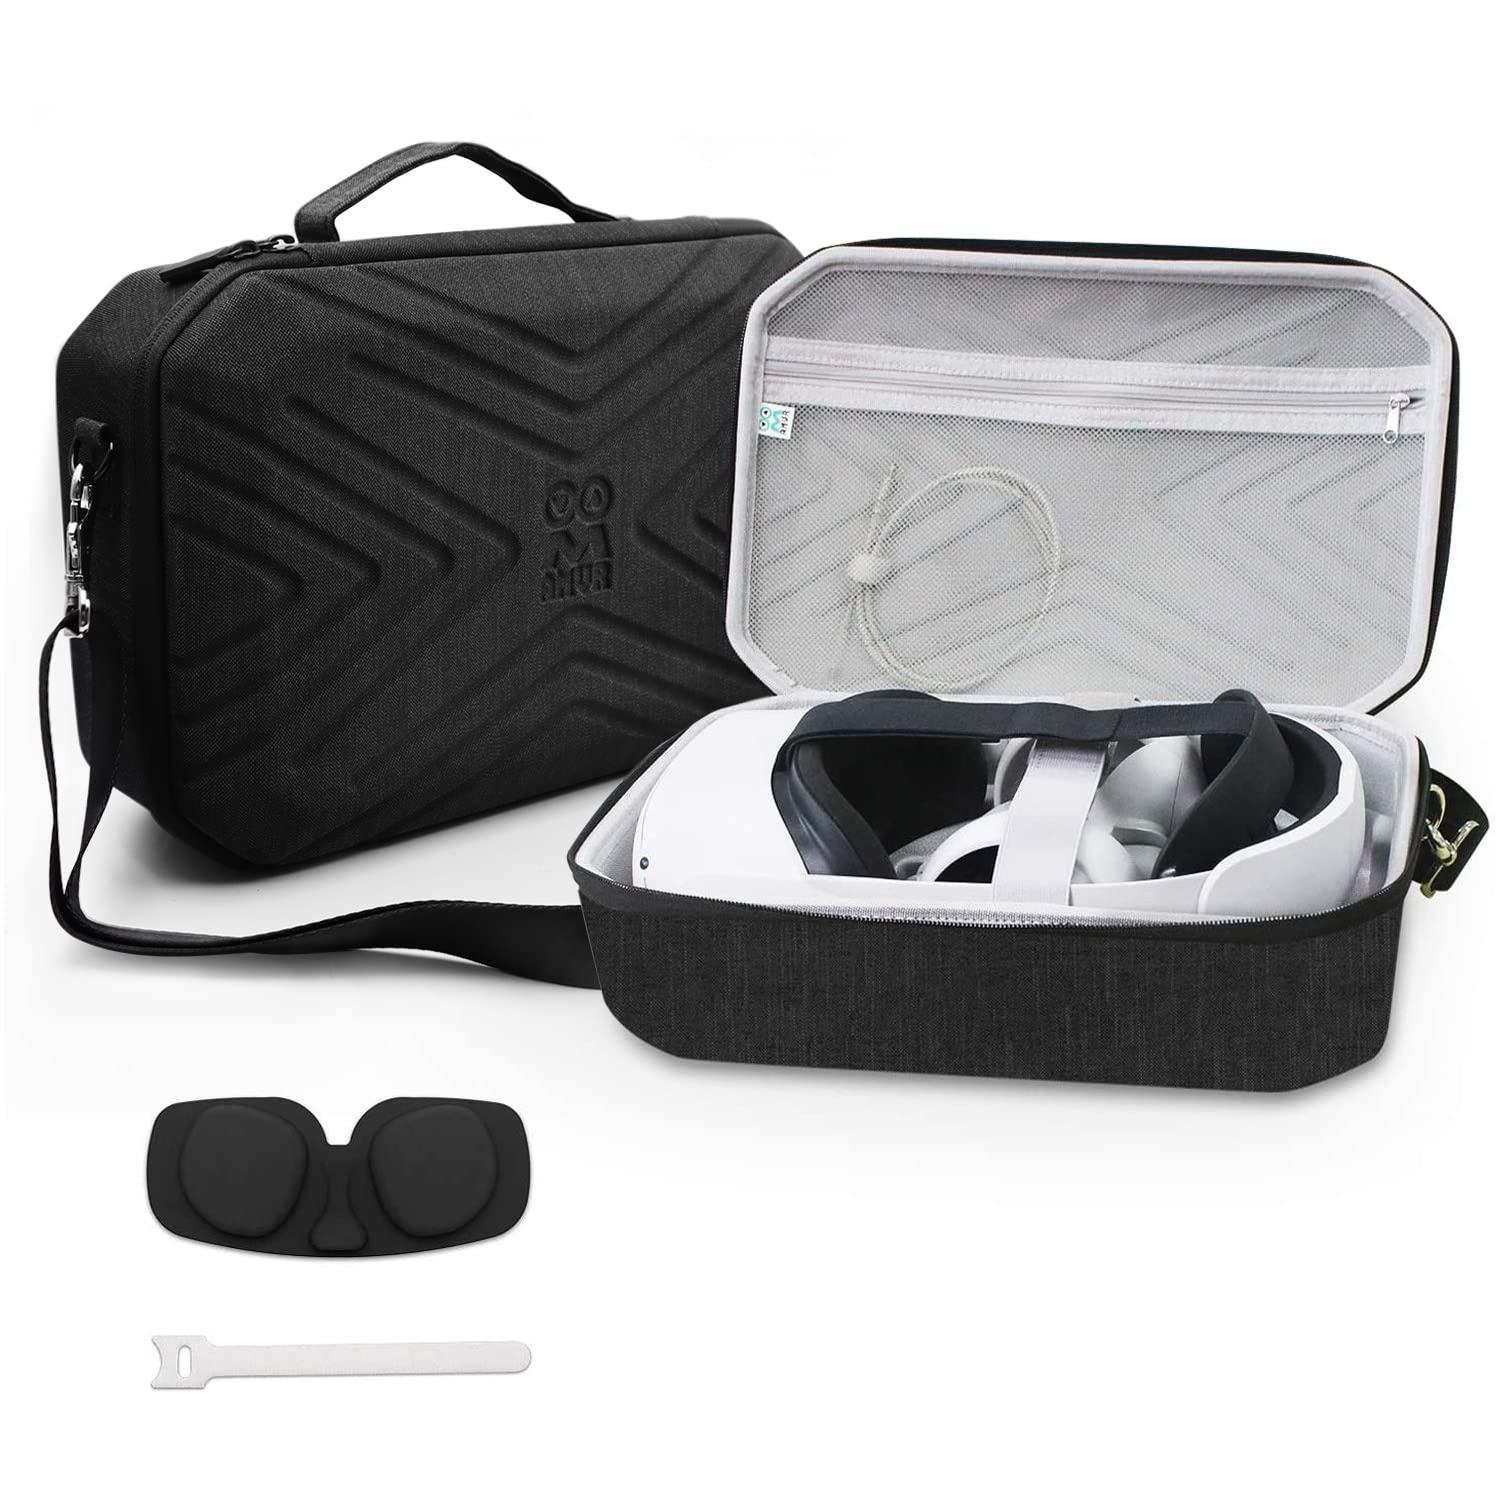 AMVR Carrying Case for Meta Quest 2 VR Headsets Elite Strap,Portable Fashion Travel Case for Meta Quest 2,Storing VR Gaming